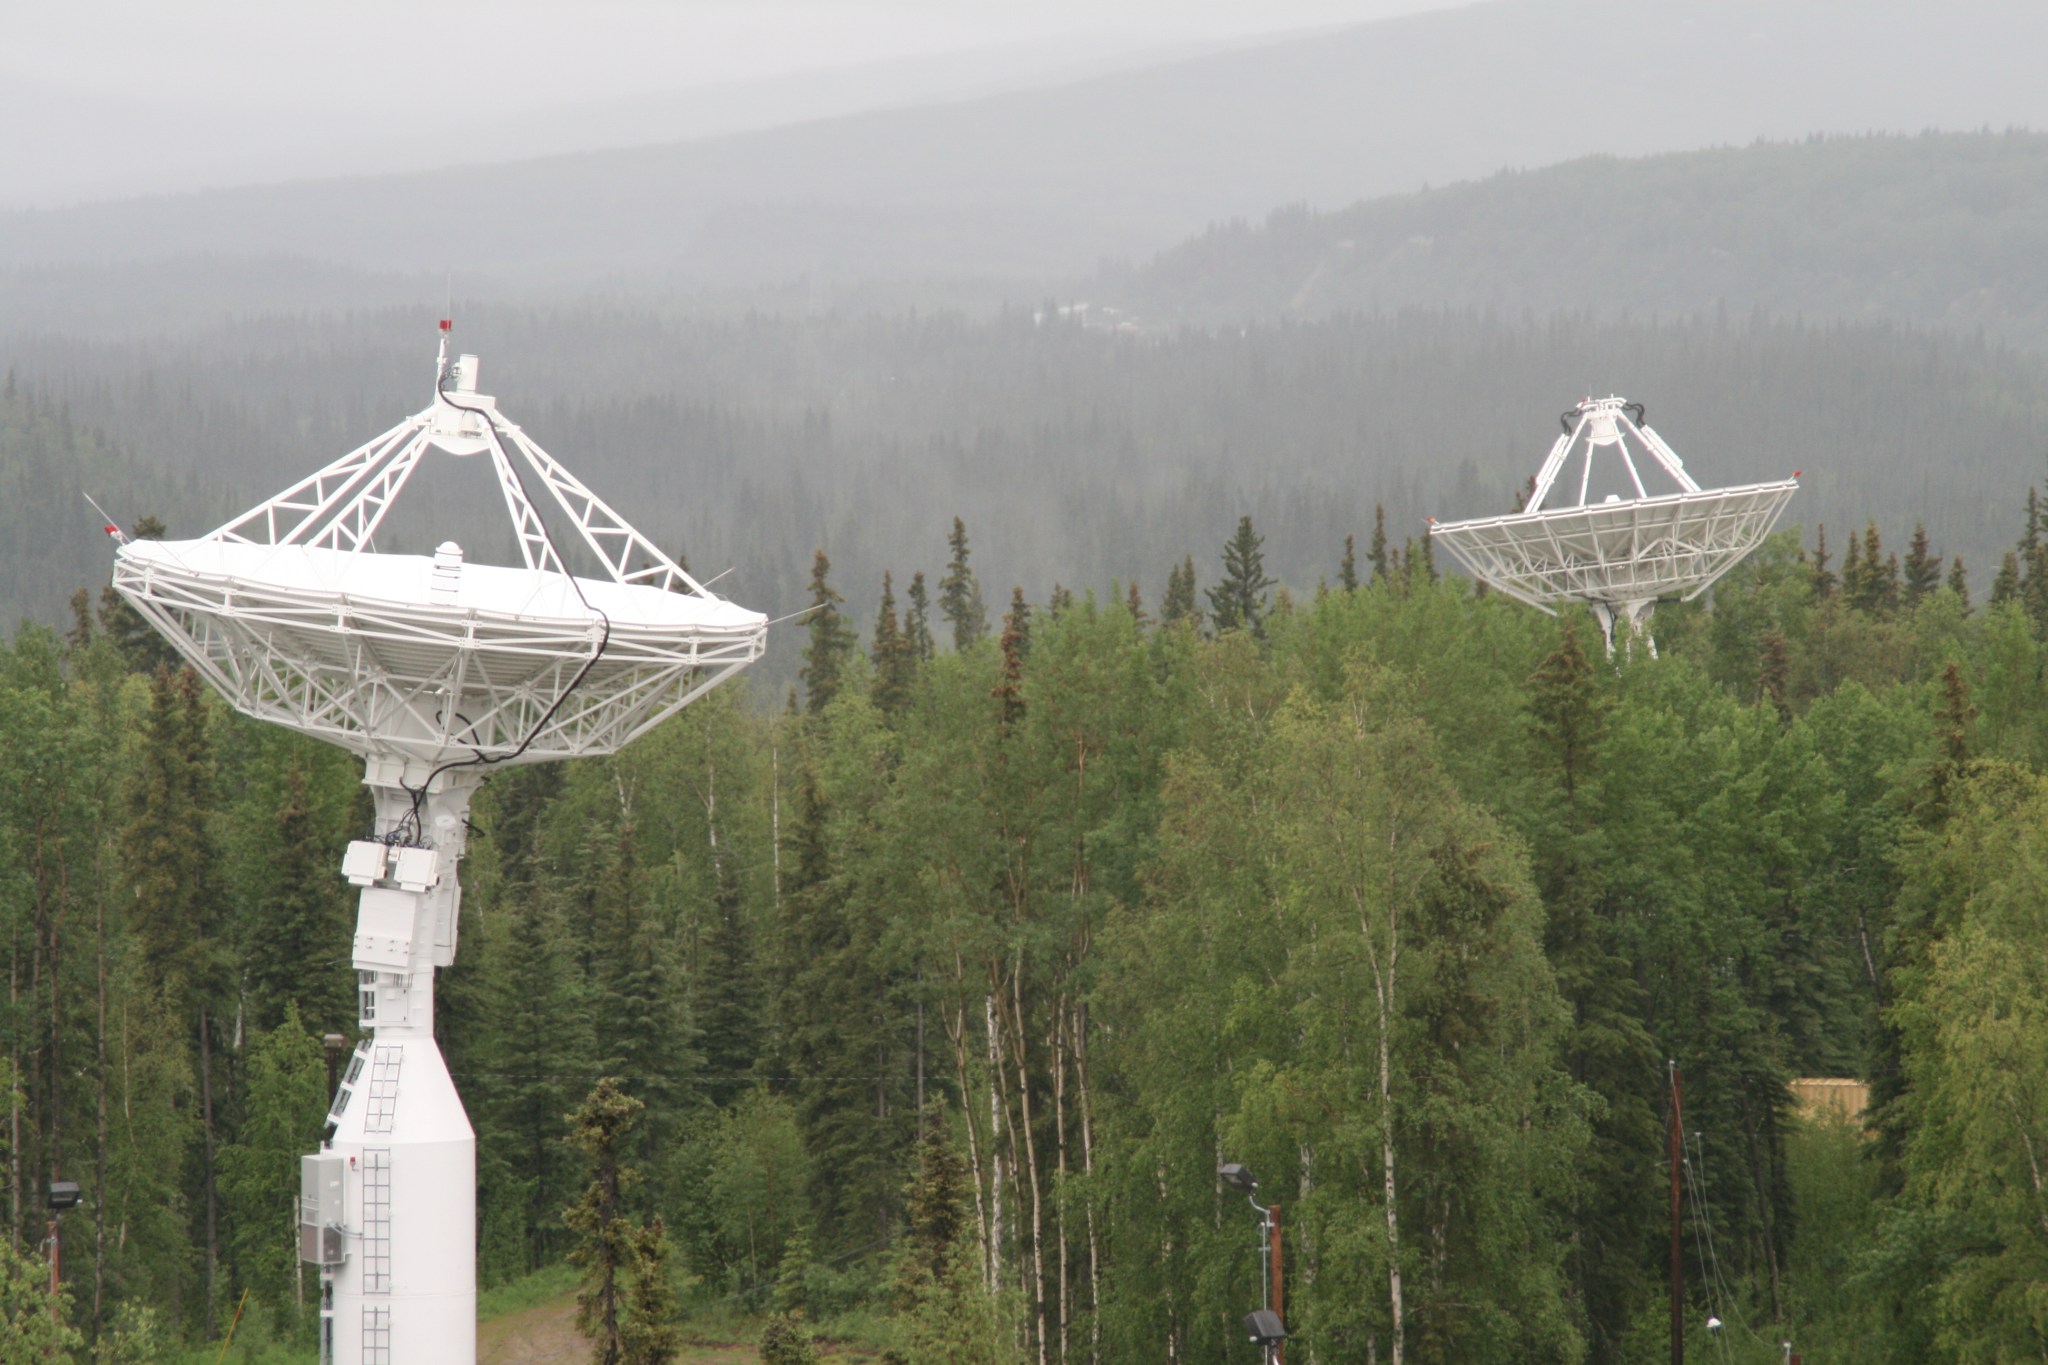 NASA's newest antenna AS-3 in the foreground and AS-1 in the background surrounded by trees. Antennas are larger than the surrounding trees. 